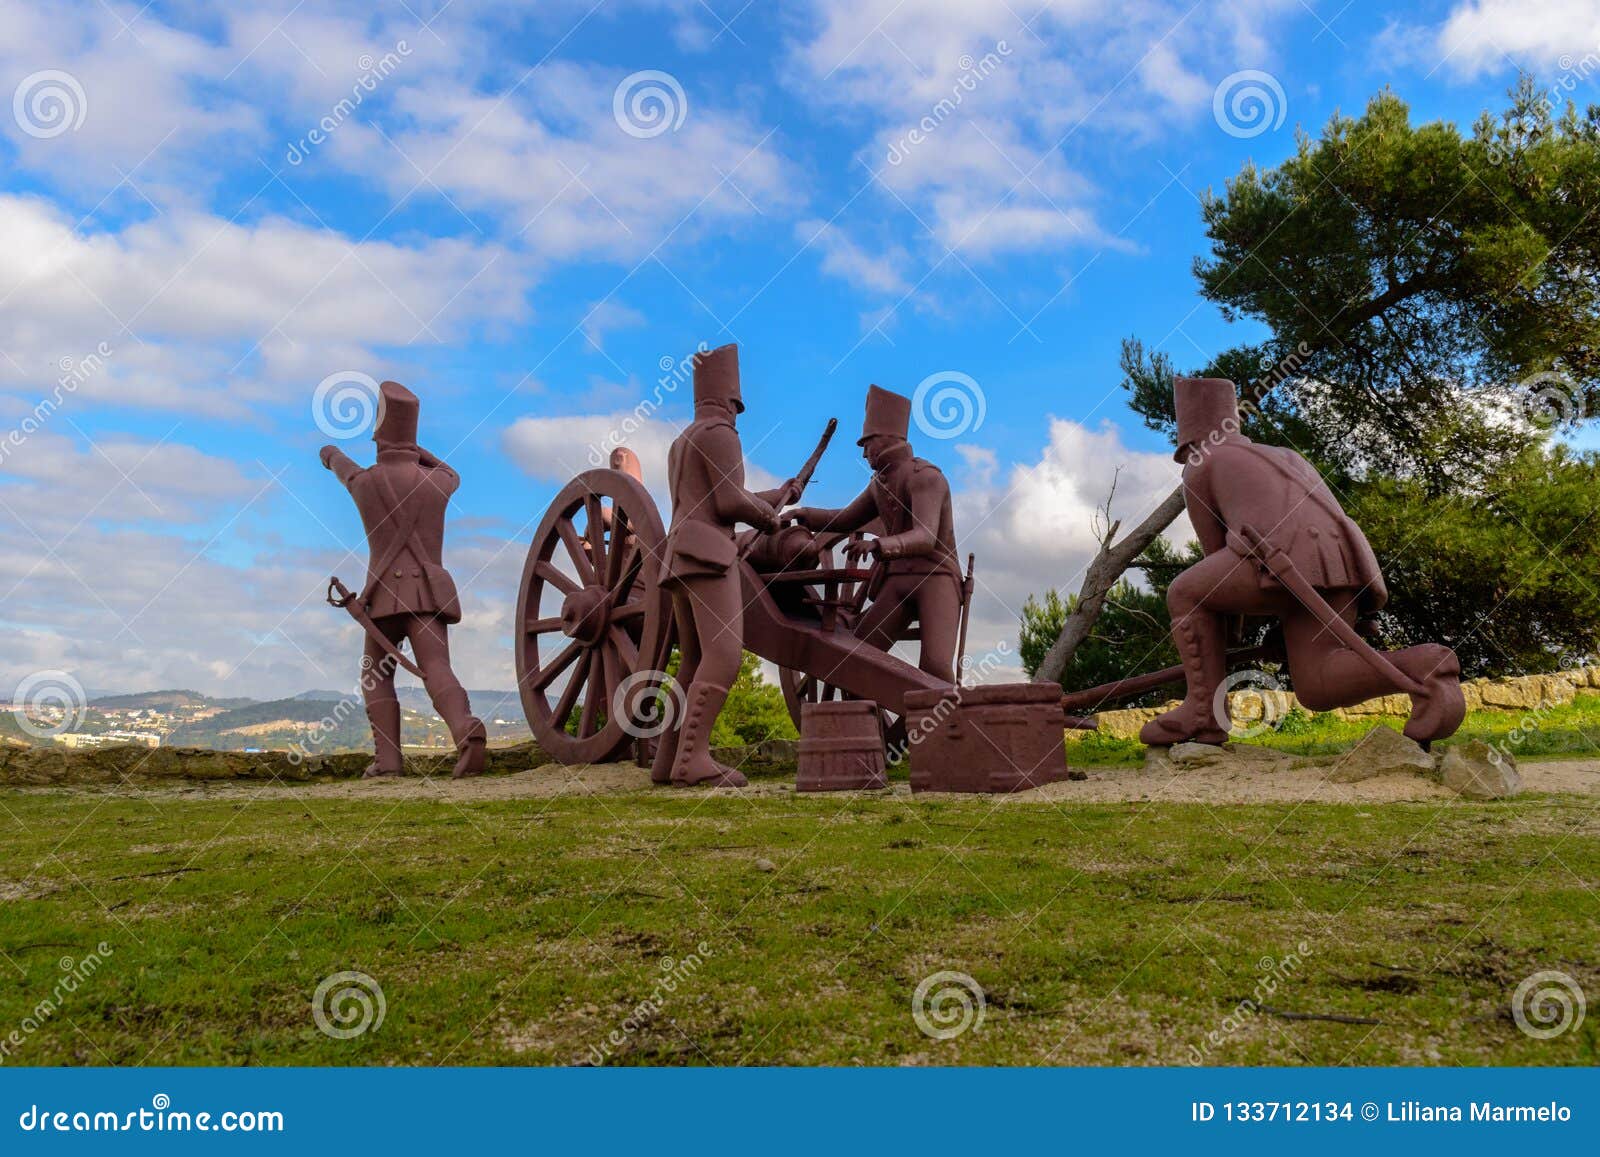 Sculpture In Honor Of The Battery Of The Lines Of Torres Vedras During The French Invasion Installed In The Castle Portugal Editorial Stock Image Image Of Landscape Green 133712134